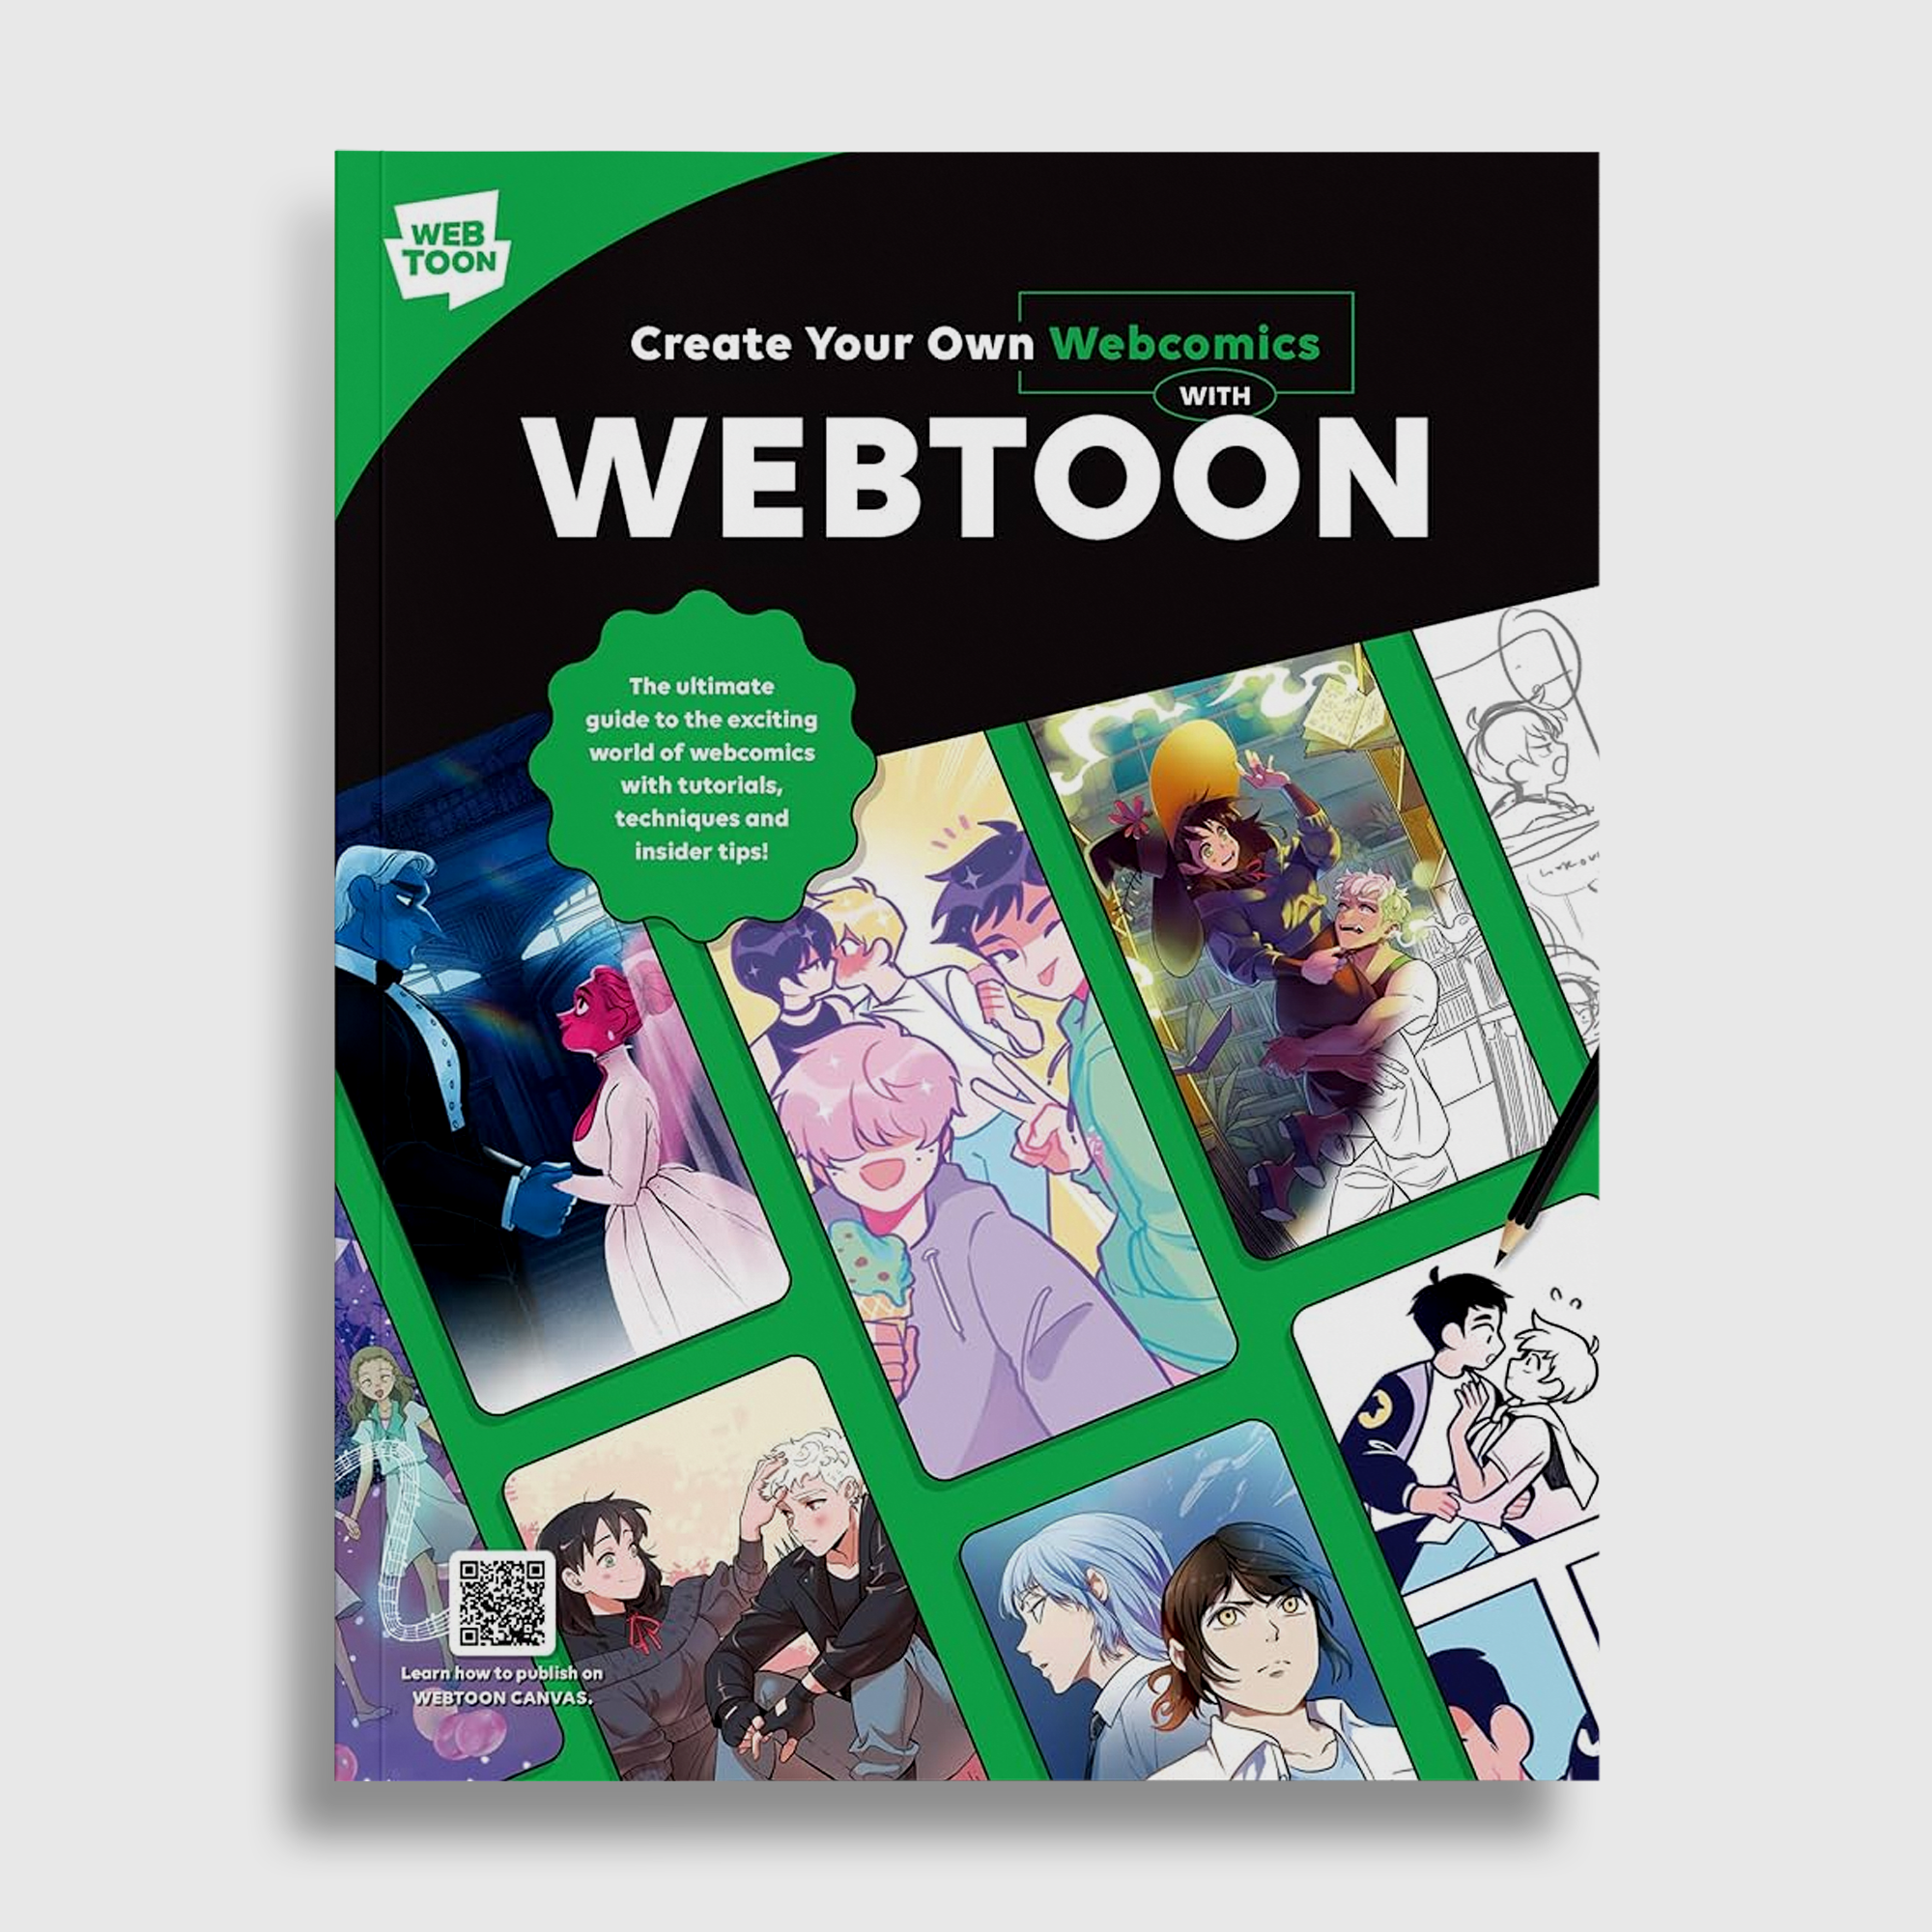 CREATE YOUR OWN WEBCOMICS WITH WEBTOON (Pre-order)